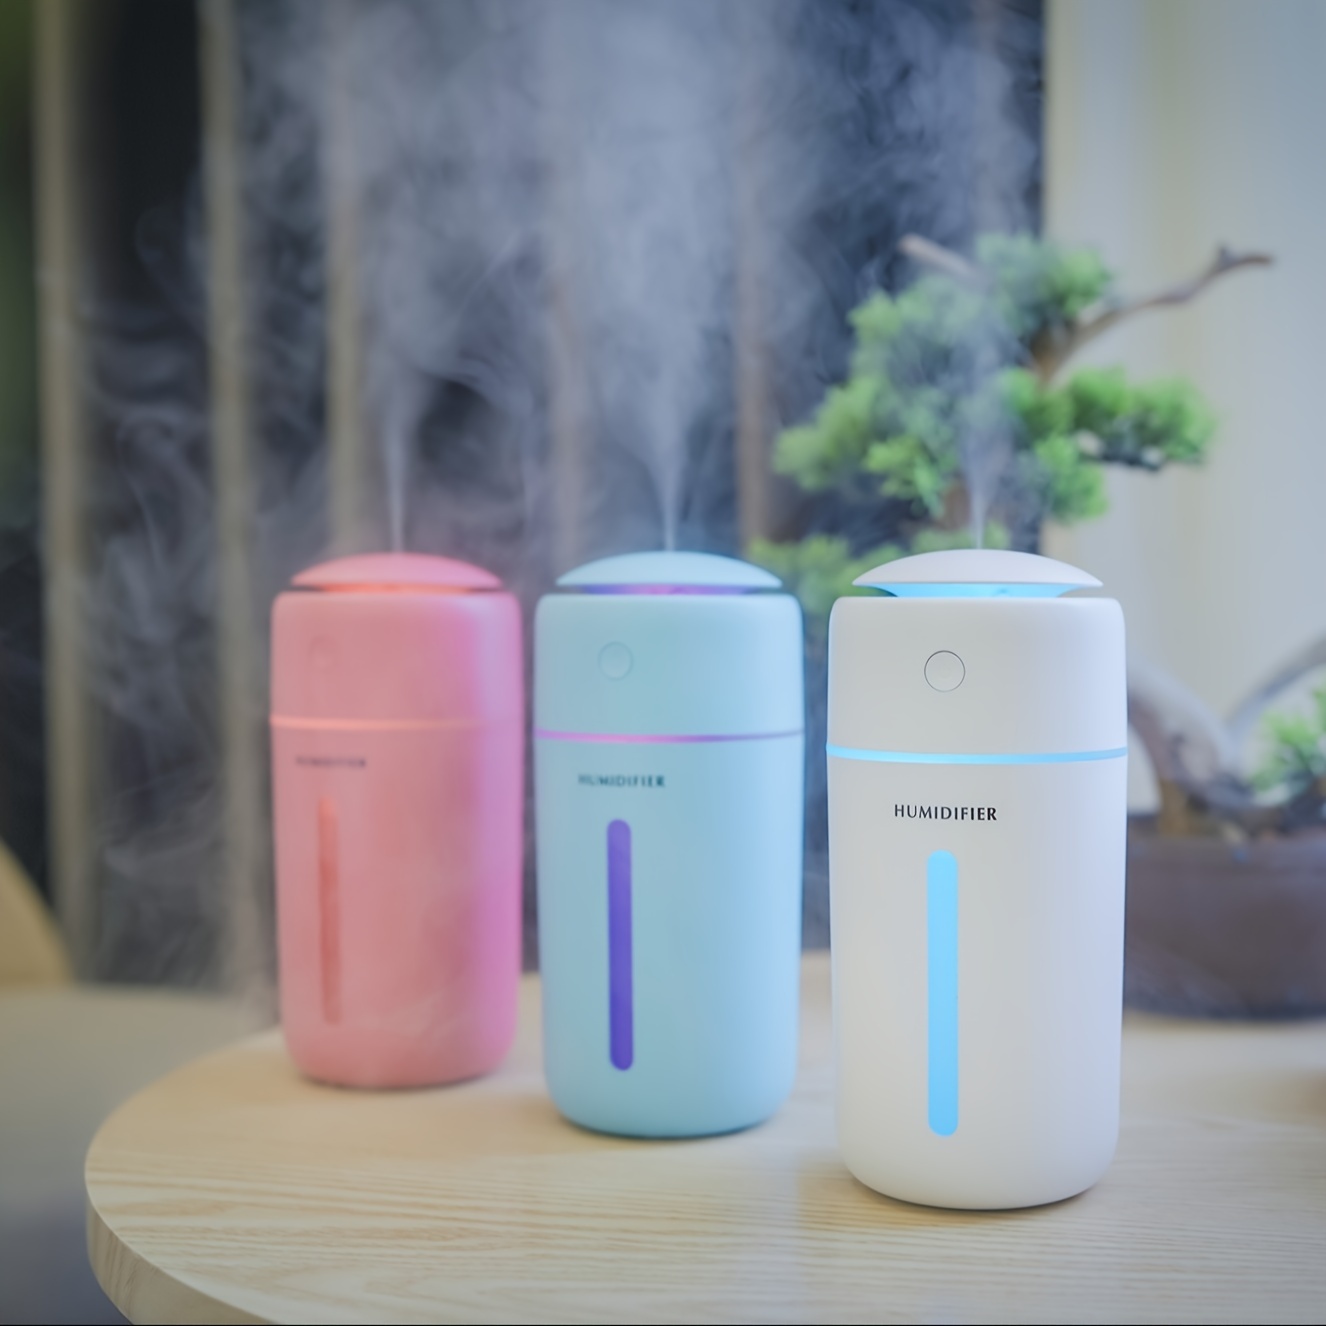 Mini Humidifier, Portable Small Cool Mist Humidifier, USB Personal Desktop  Vaporizer, Night Light Function, Super Quiet for Car, Office, Home